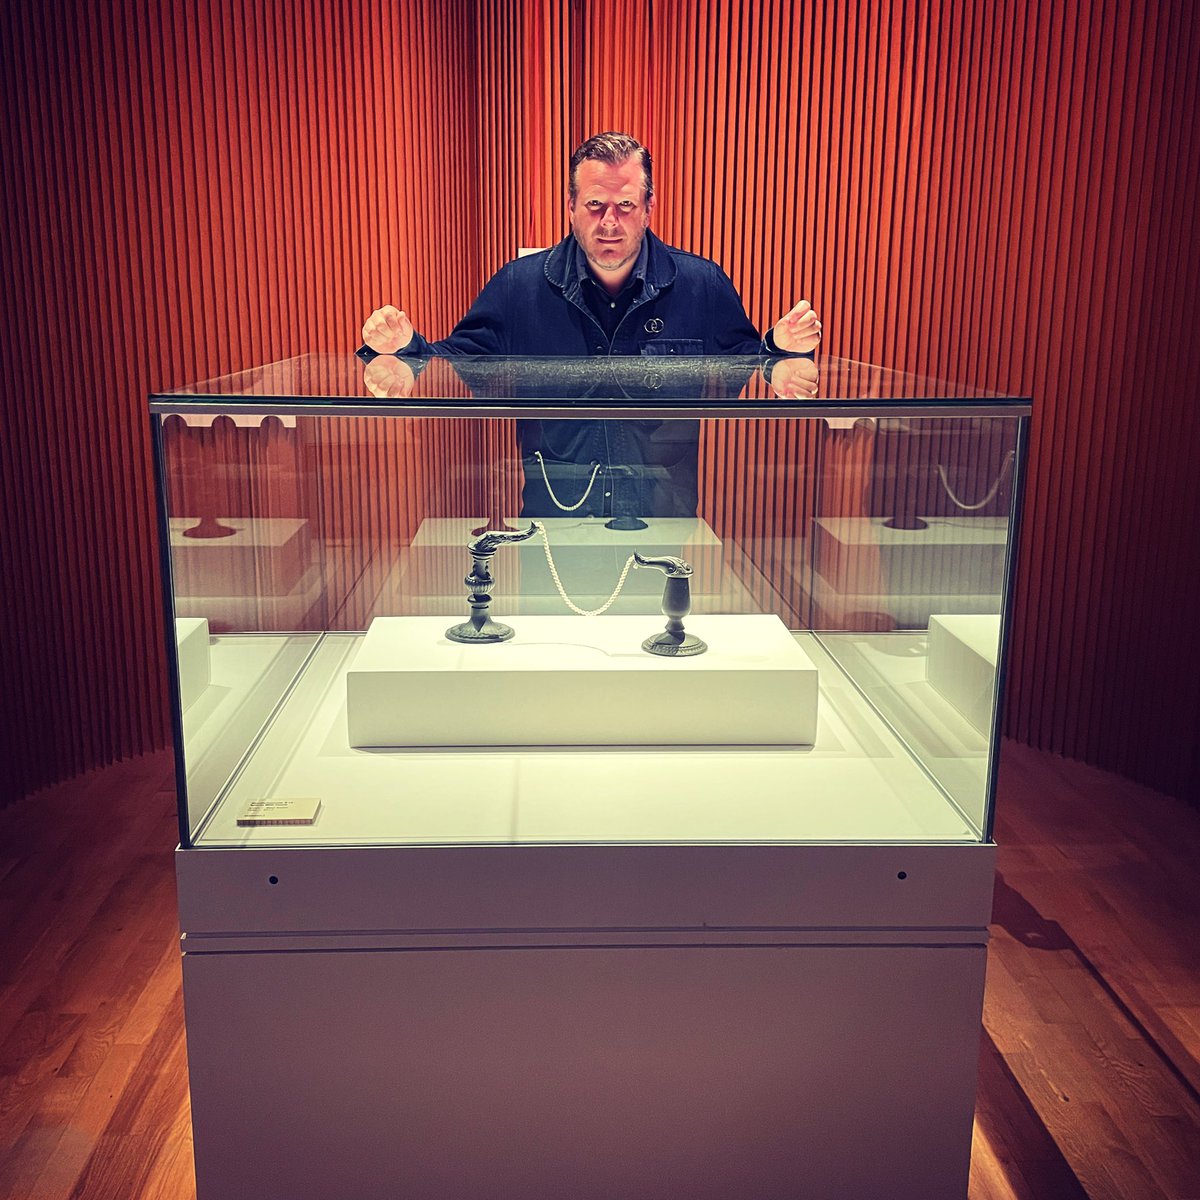 So great to have artist @MattJSmithcom visit our new exhibition #PowertotheYoungPeople by @ReimagineRemake Replay at the @UlsterMuseum today. Our newly acquired sculpture by Matt has gone on display for the first time.